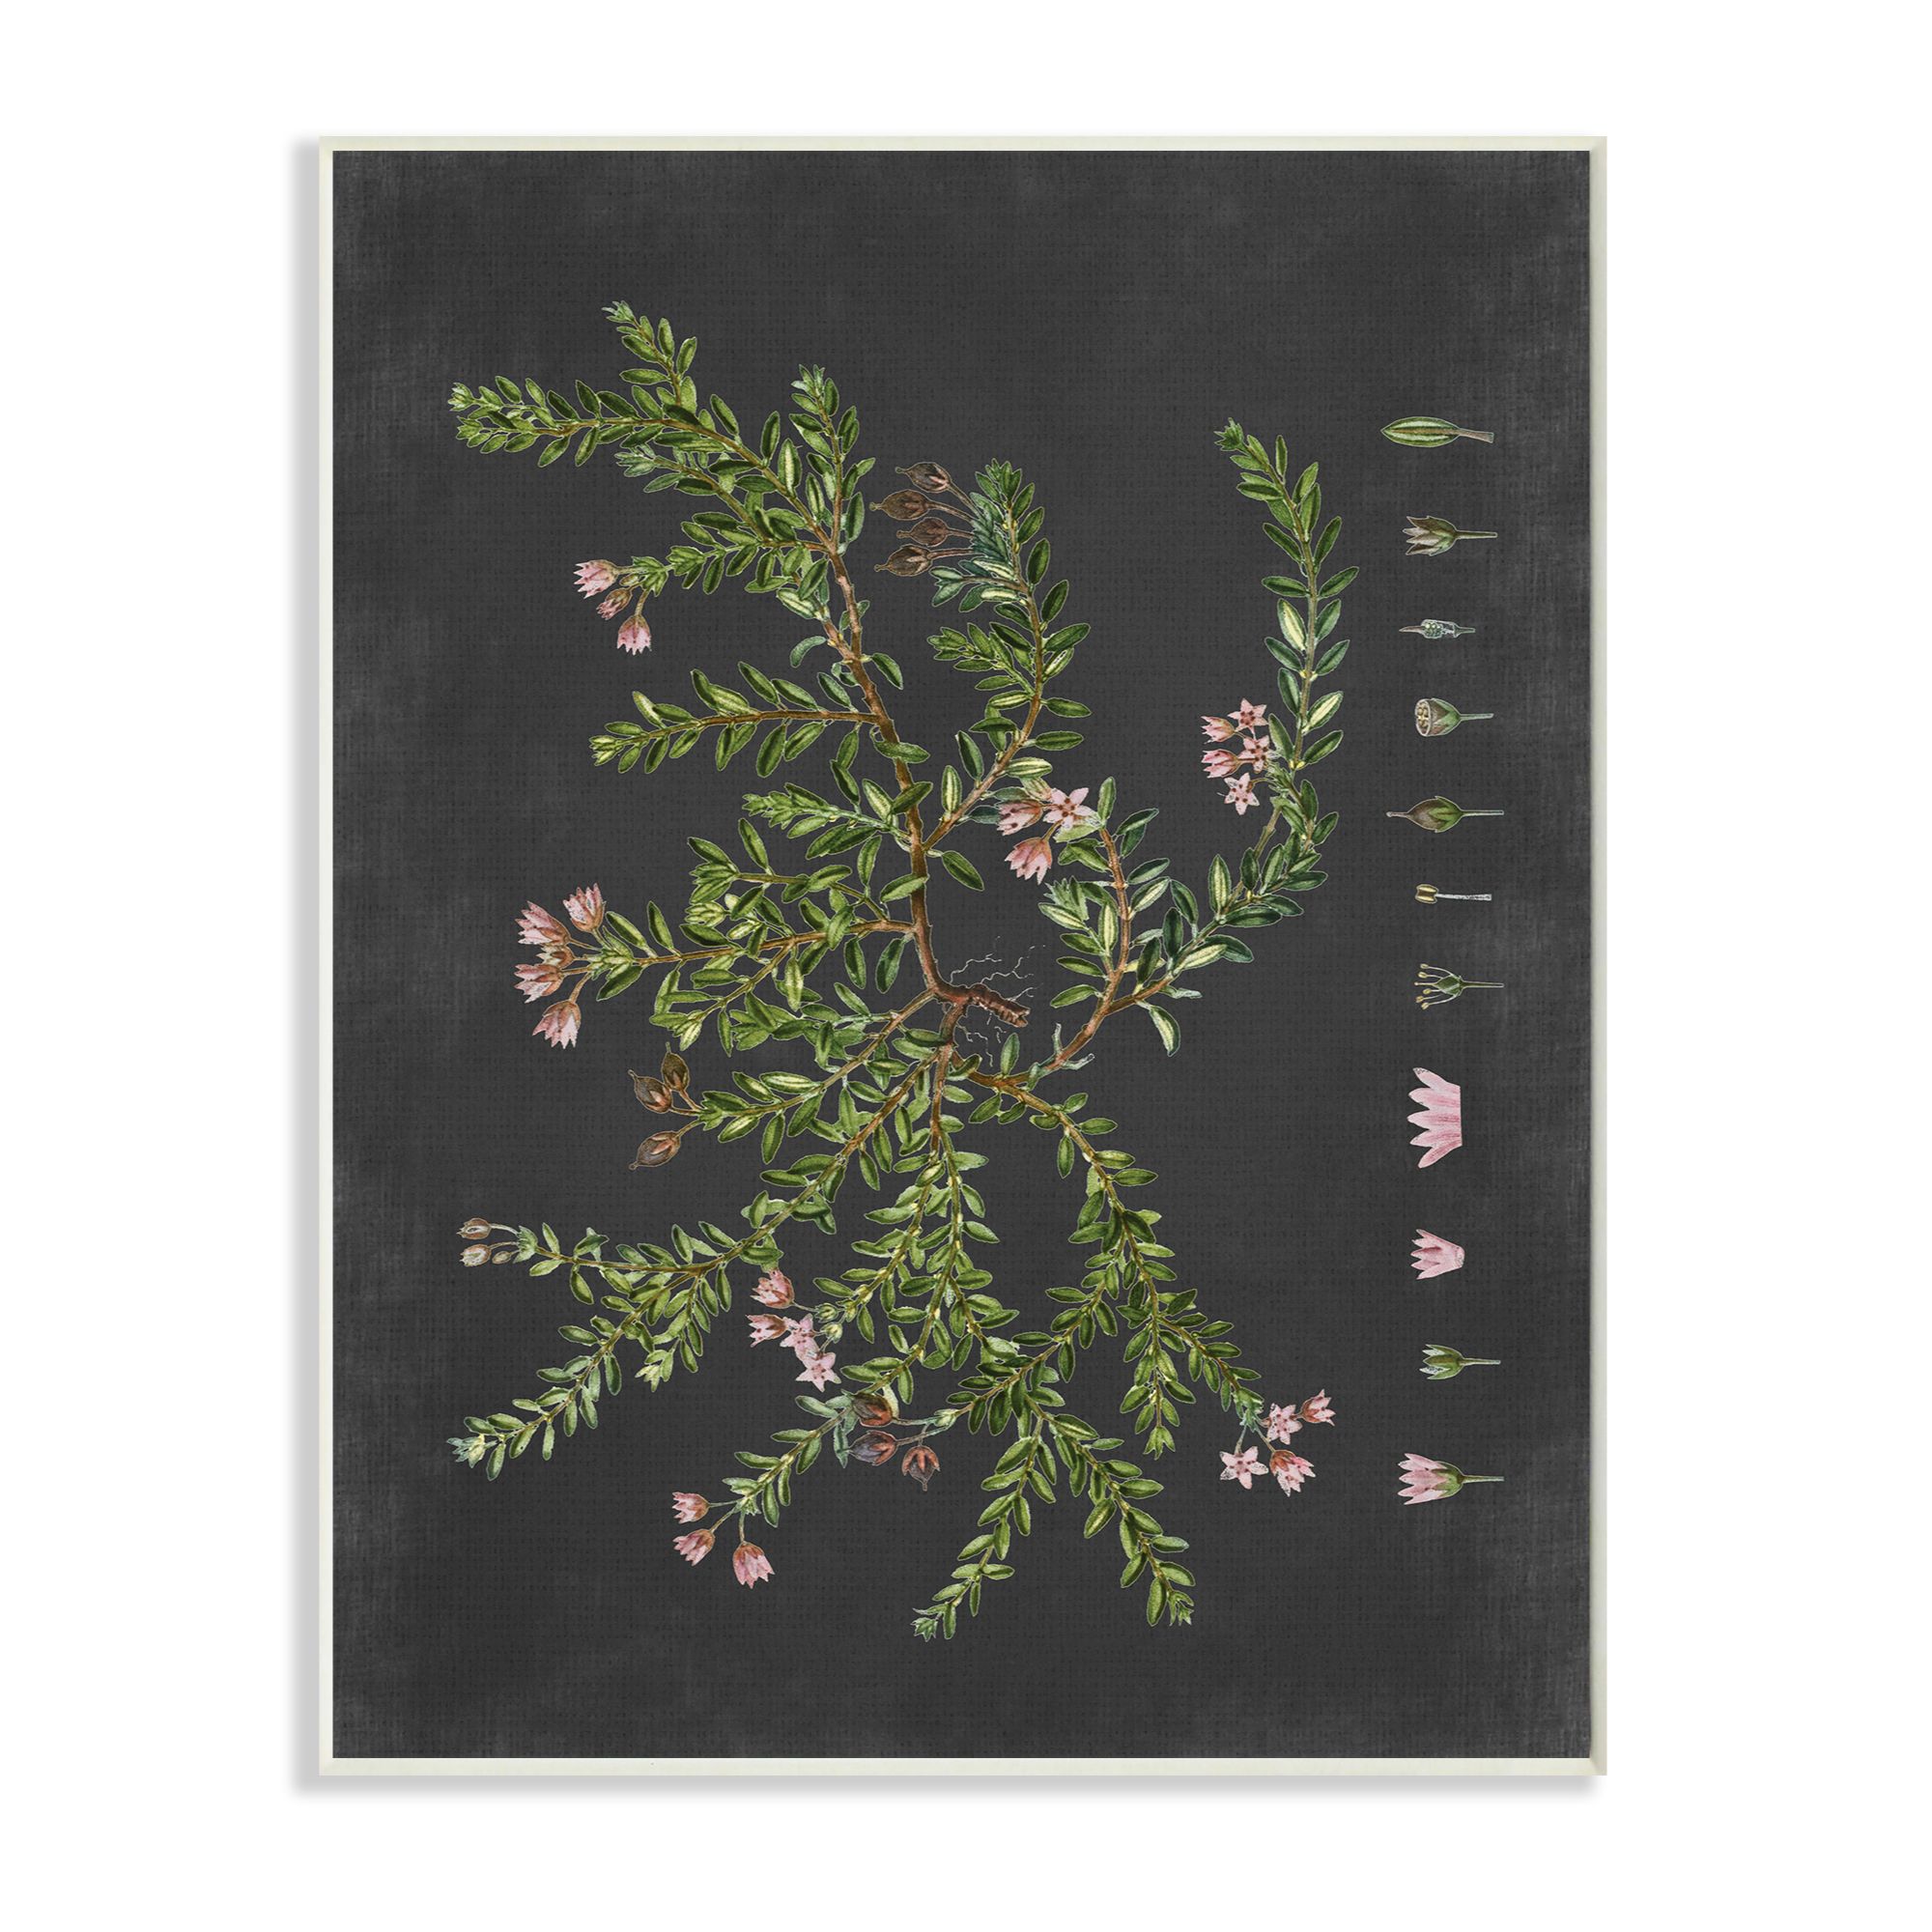 Stupell Industries Botanical Drawing Flower Pink On Black Design Wall Plaque by Lettered and Lined - image 1 of 1